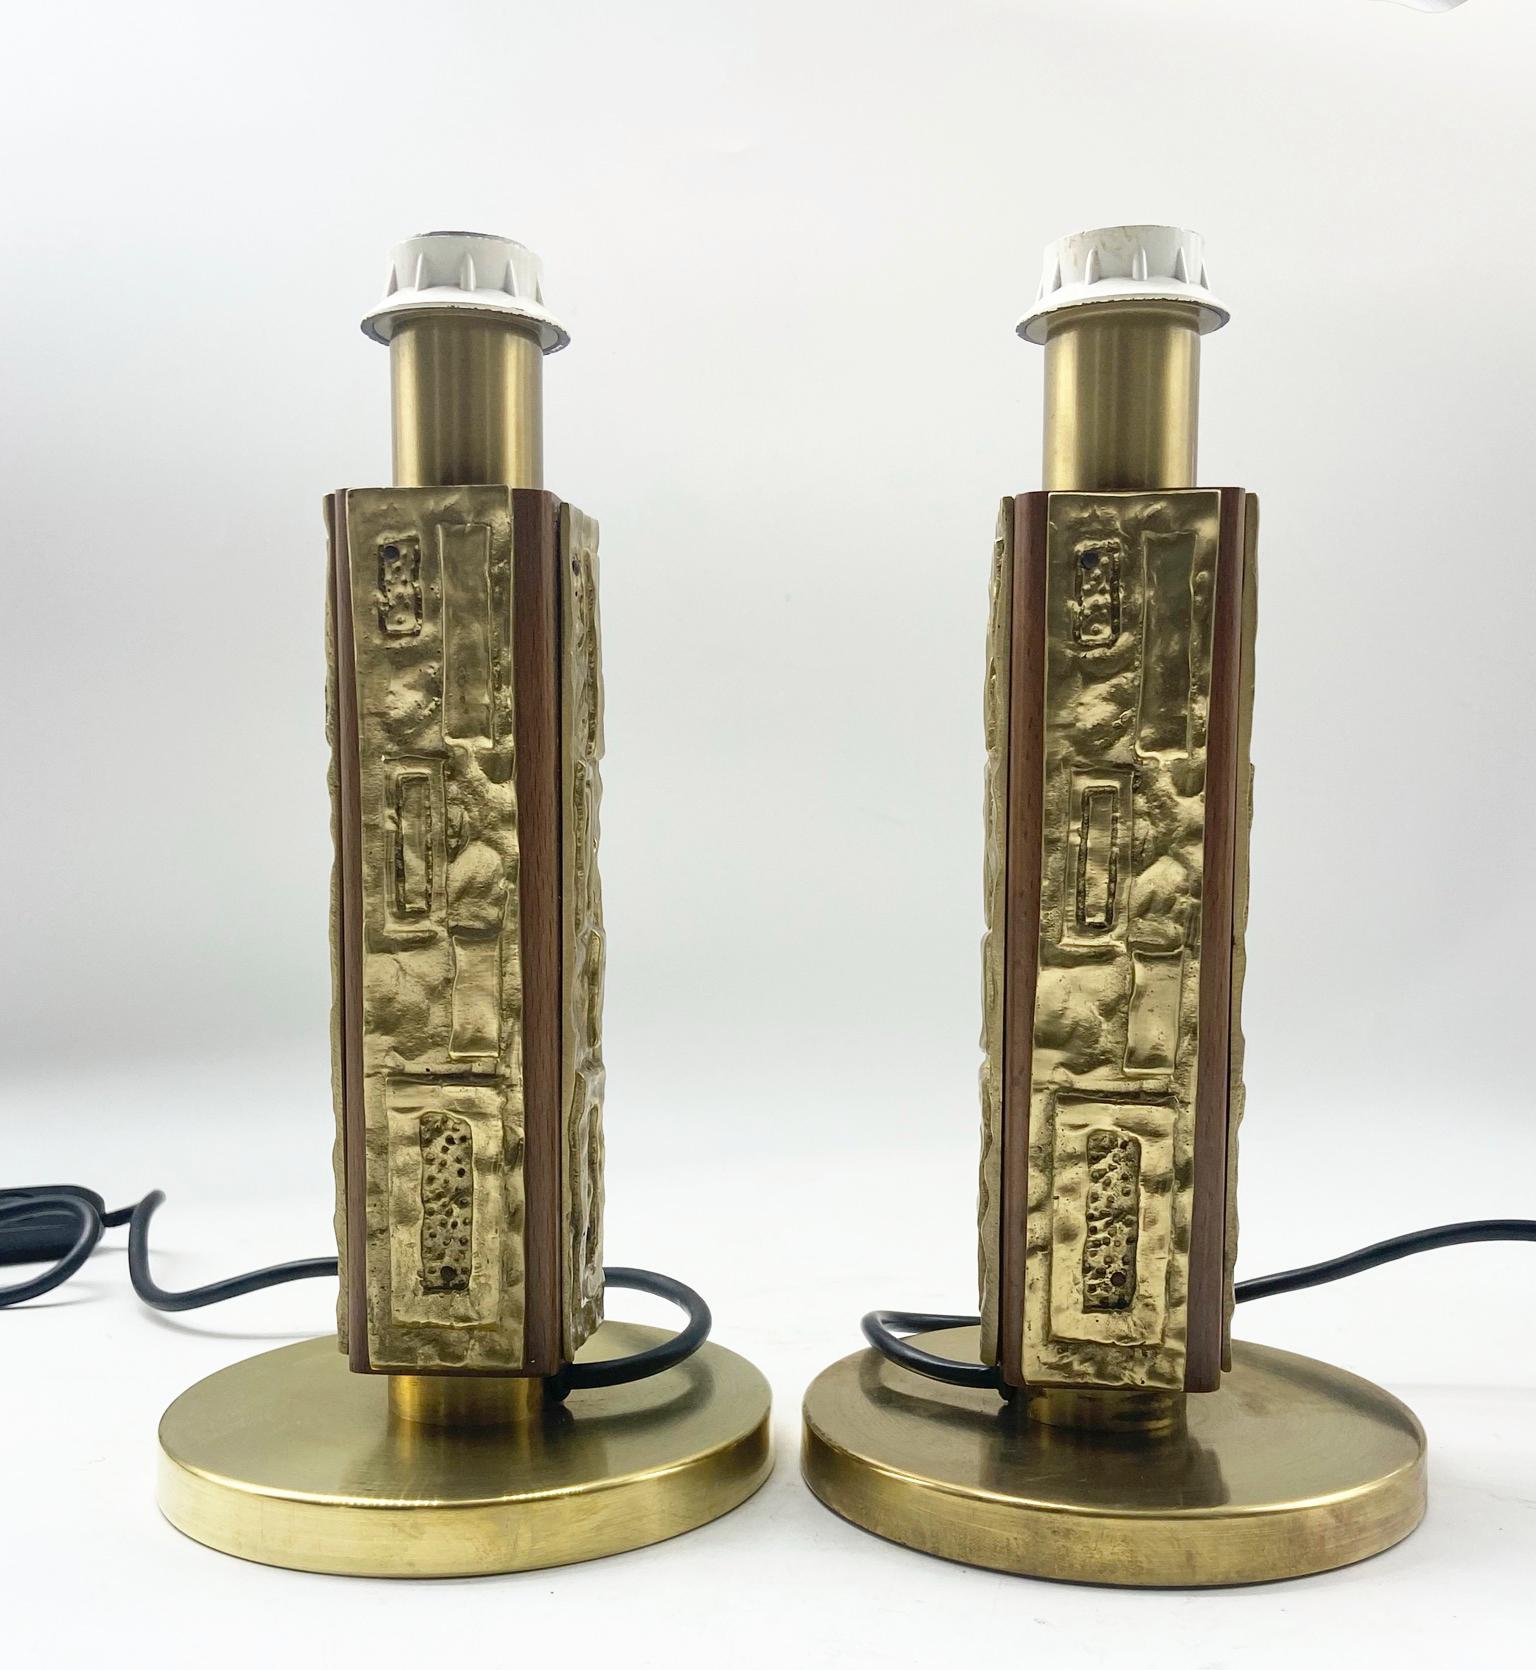 Pair of table lamps in wood and worked brass, of Italian production, the workmanship and style are by the artist Angelo Brotto who designed them for the Esperia Italia company in the 1960s.